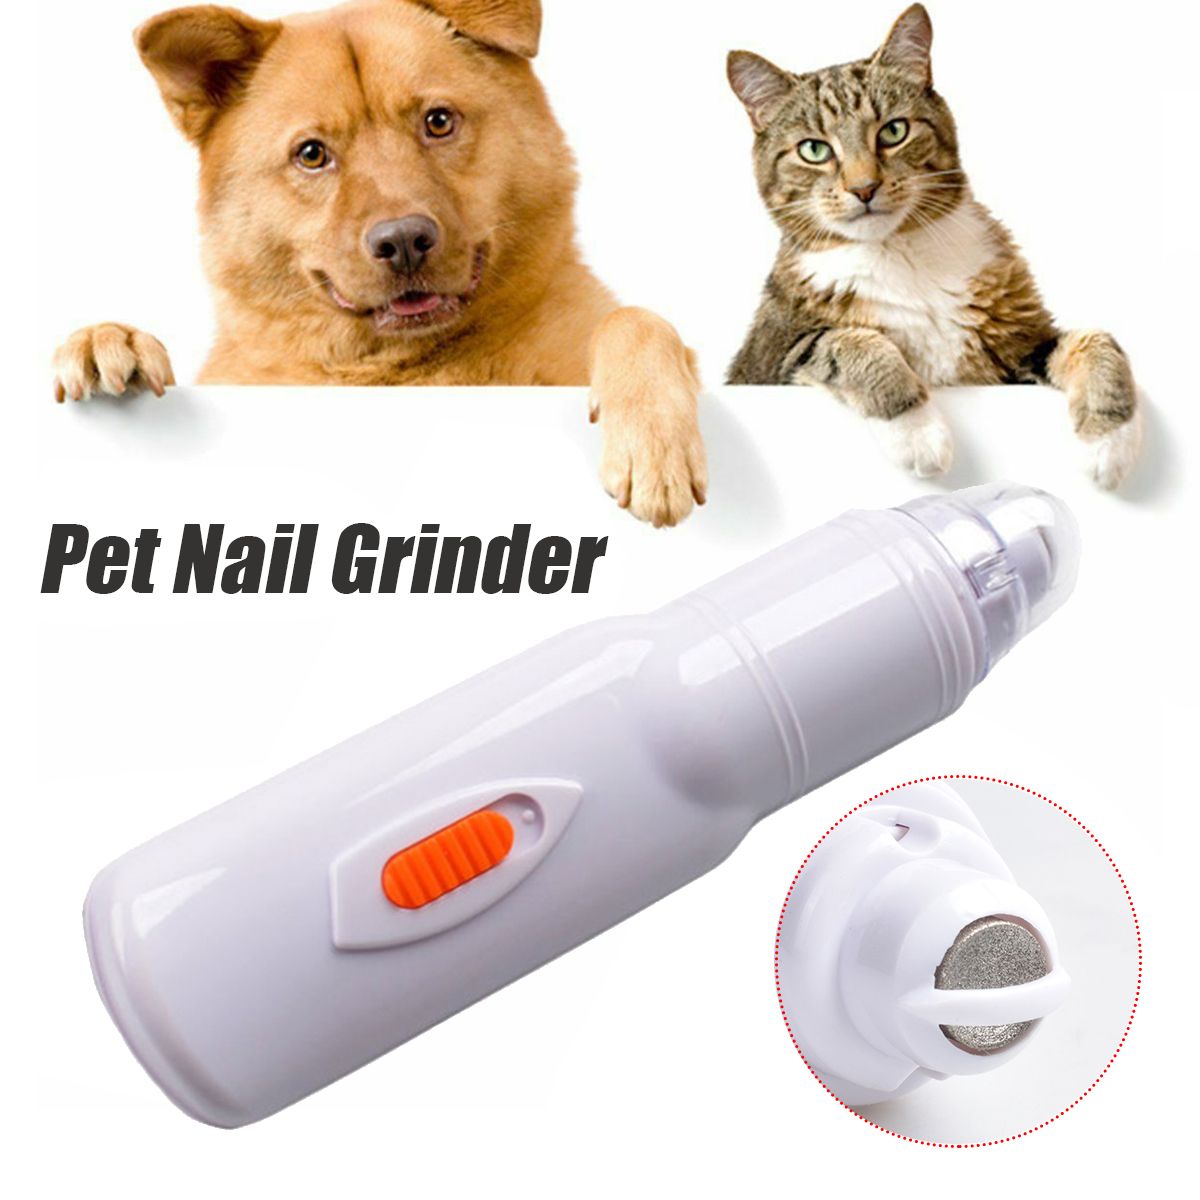 Pet-Dog-Cat-Nail-Electric-Grinder-Clipper-Claw-Grooming-Trimmer-Sharpener-Tools-1659839